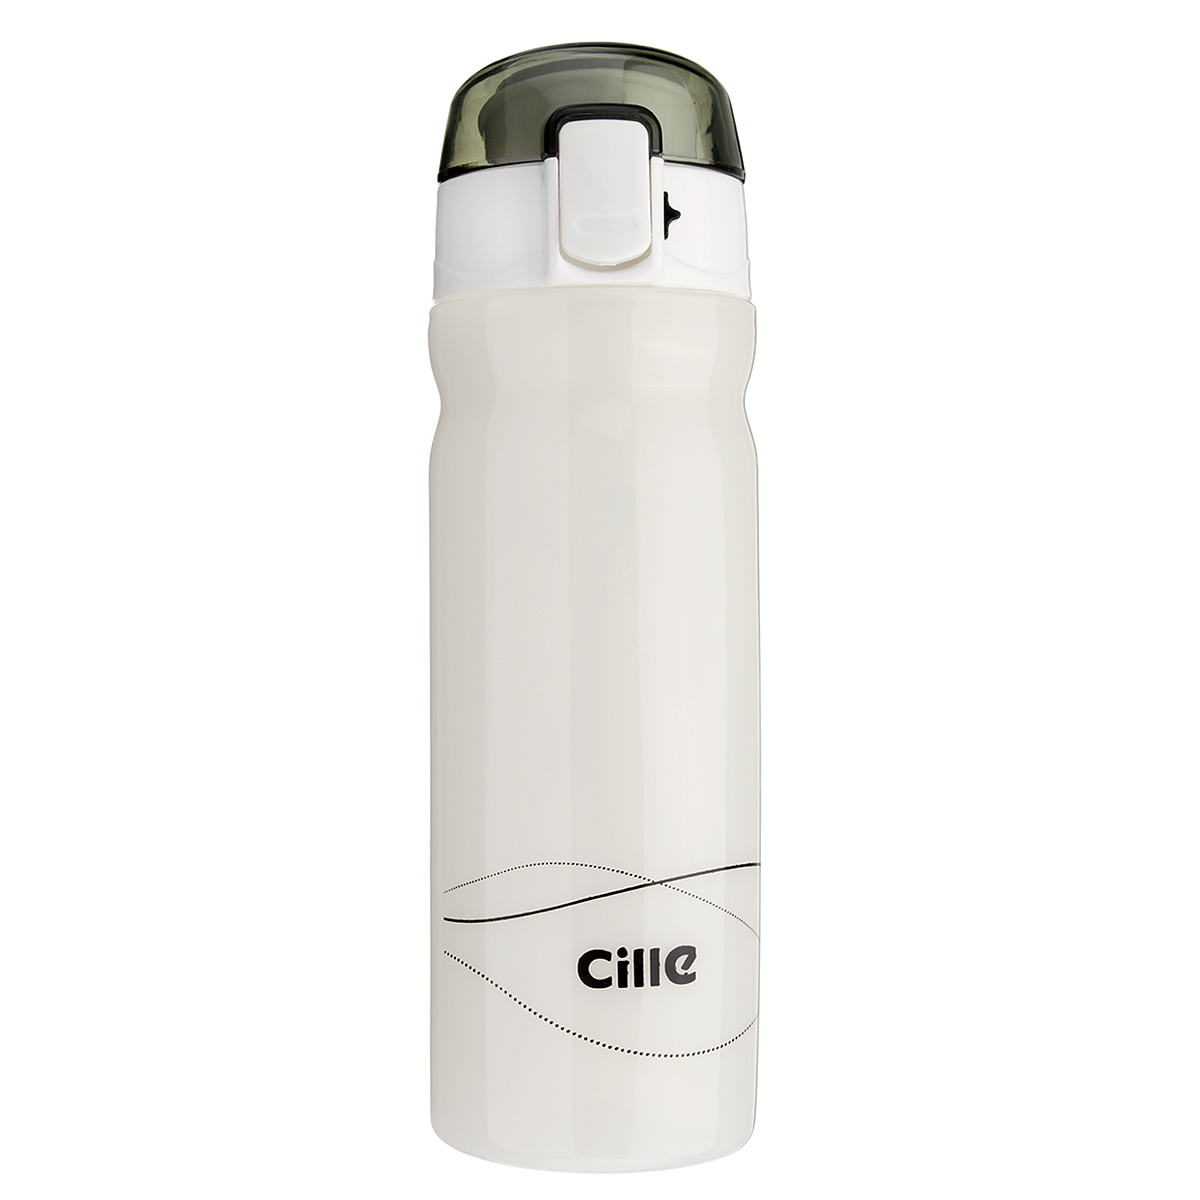 600ml20oz-High-quality-Food-Grade-Water-Bottle-for-long-hikes-trekking-hot-yoga-class-long-load-trip-1523049-9